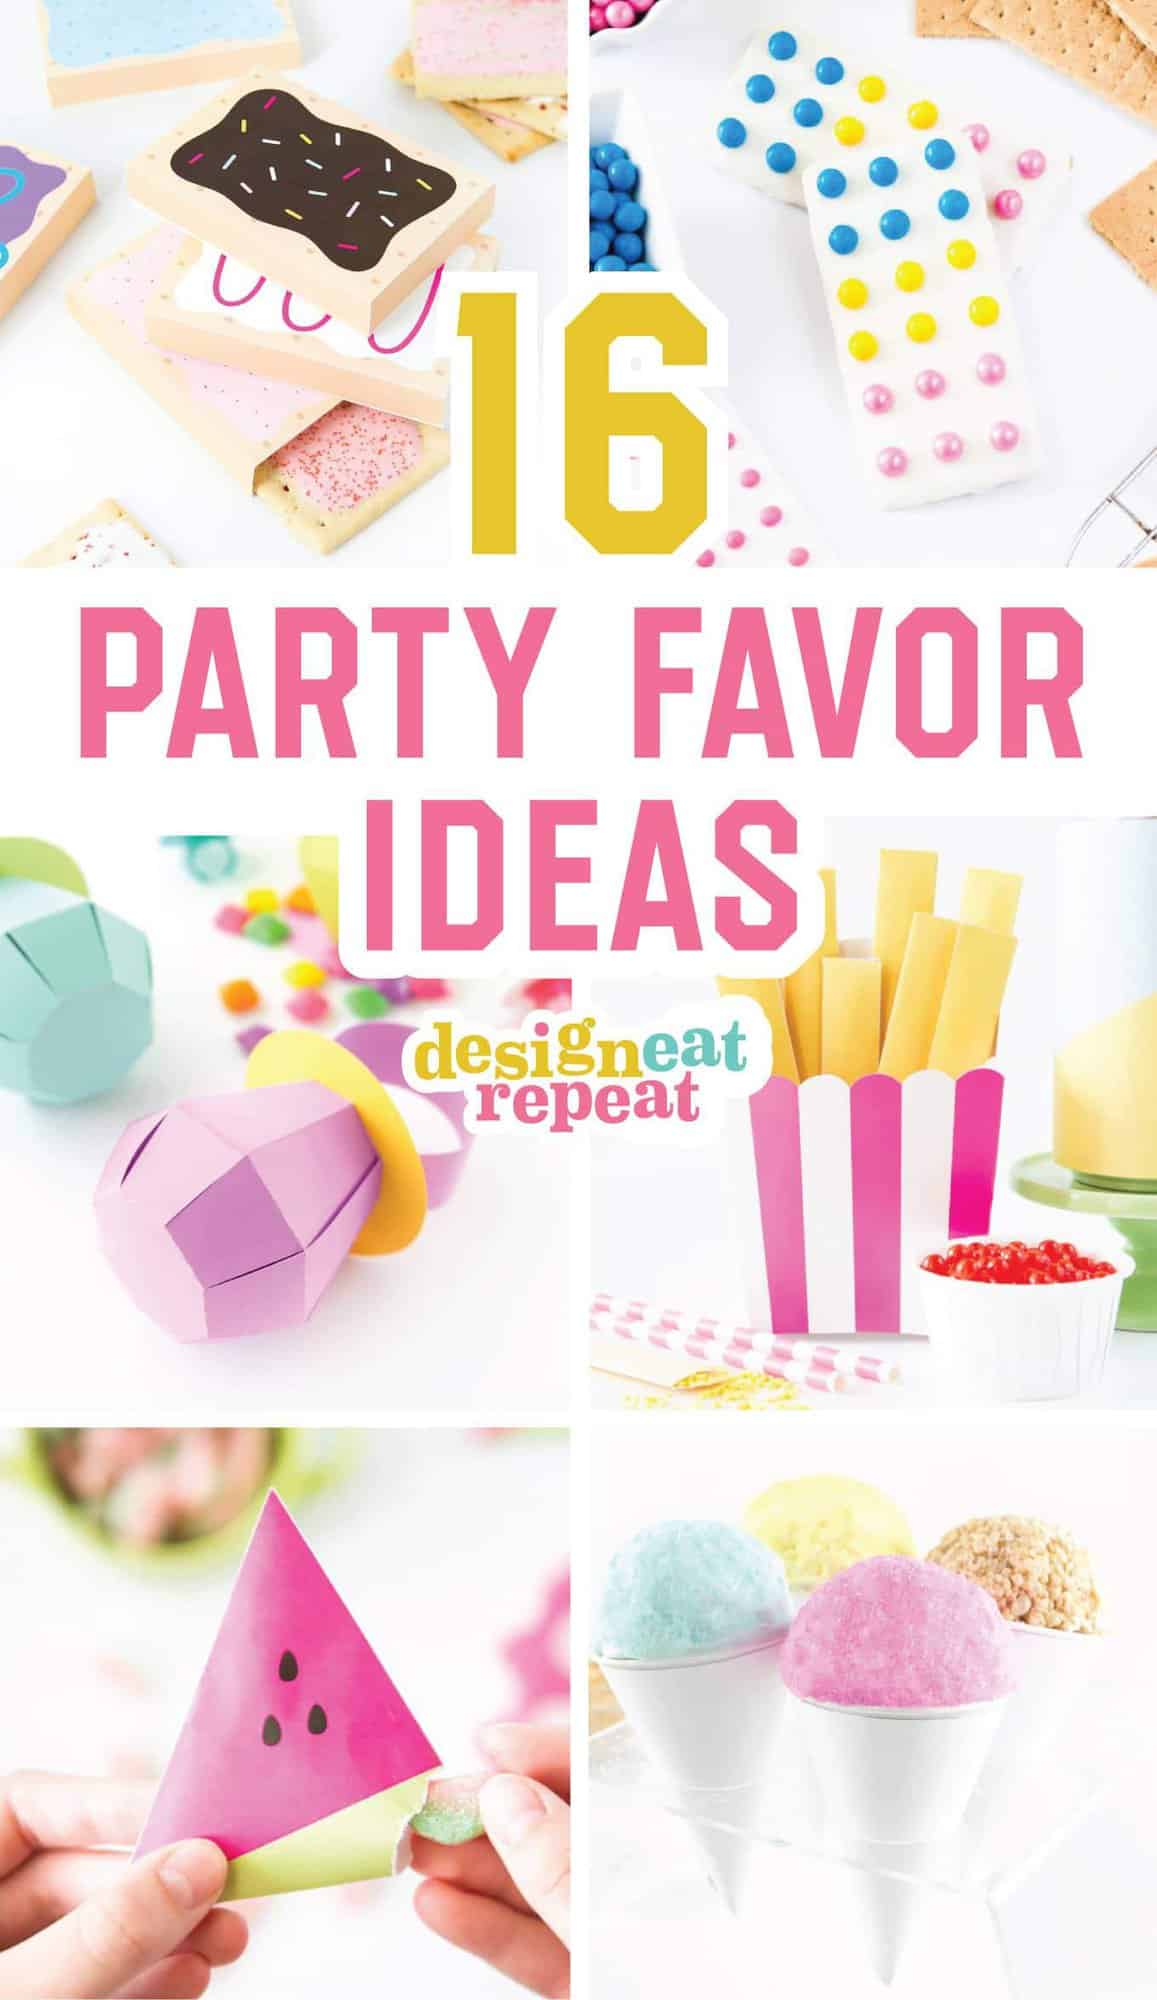 Need some new party favor ideas to keep in your back pocket? You'll want to save this post, because Design Eat Repeat has rounded up 16 unique party favor ideas that are sure to fit the bill for any occasion! | DesignEatRepeat.com | #partyfavor #printable